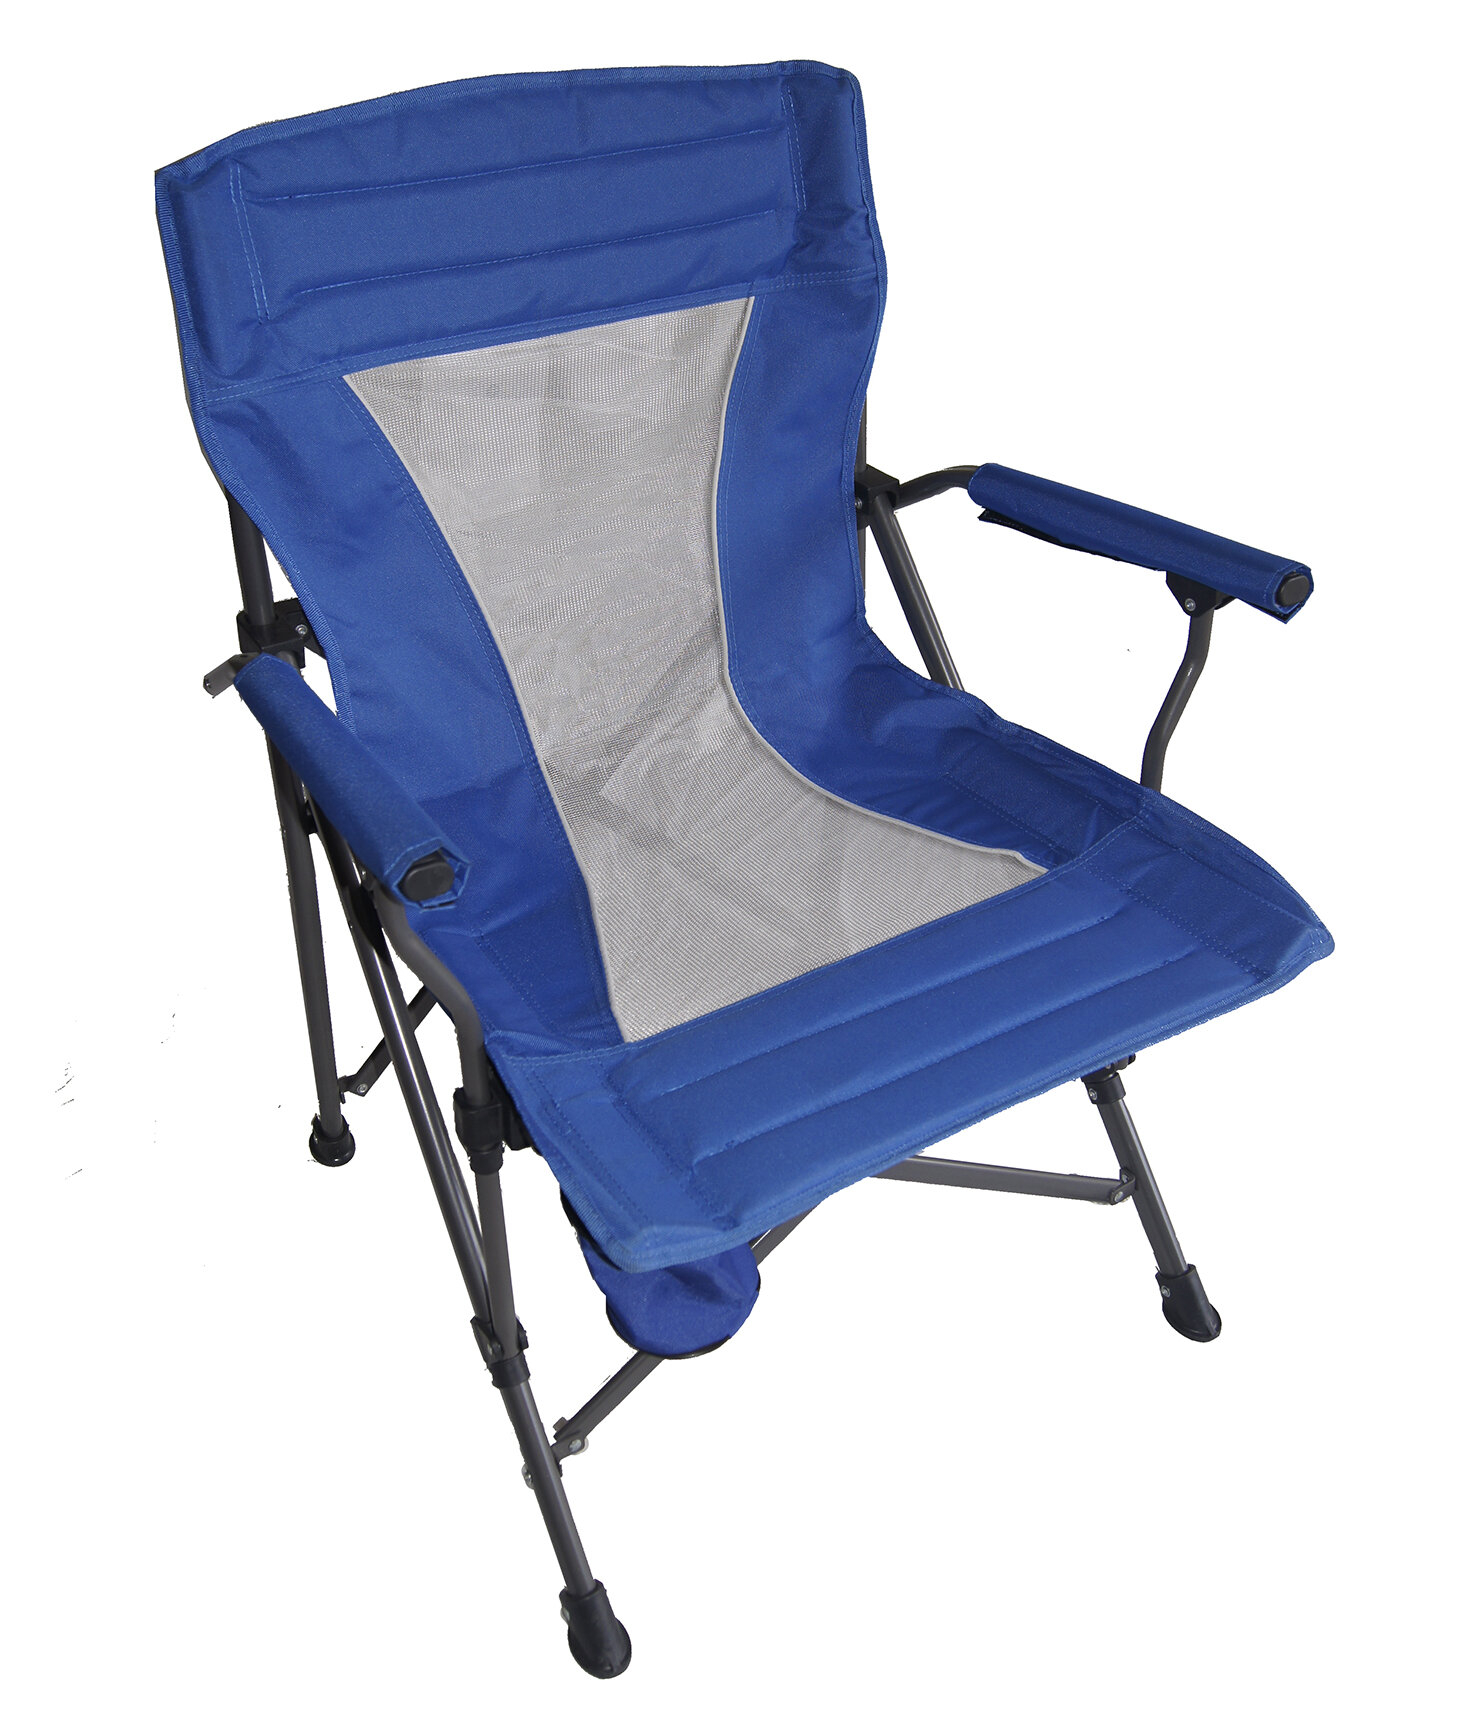 Portable Folding Chair In Blue 